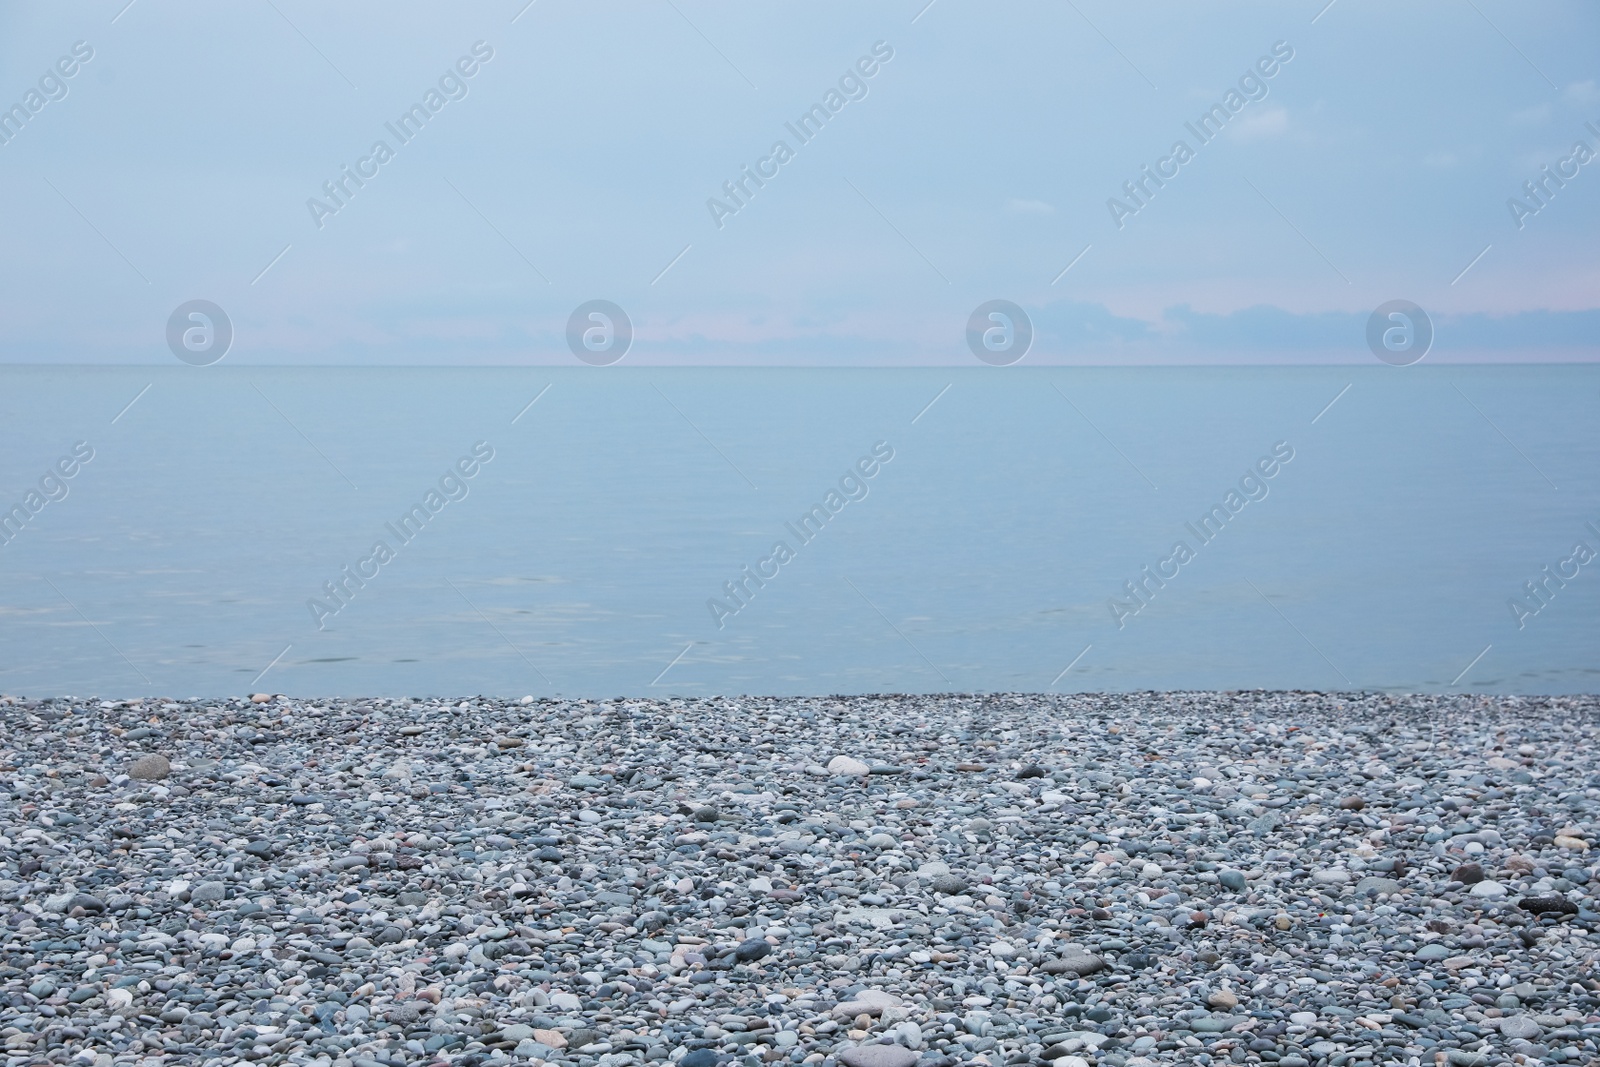 Photo of Picturesque view of beach with pebbles near sea